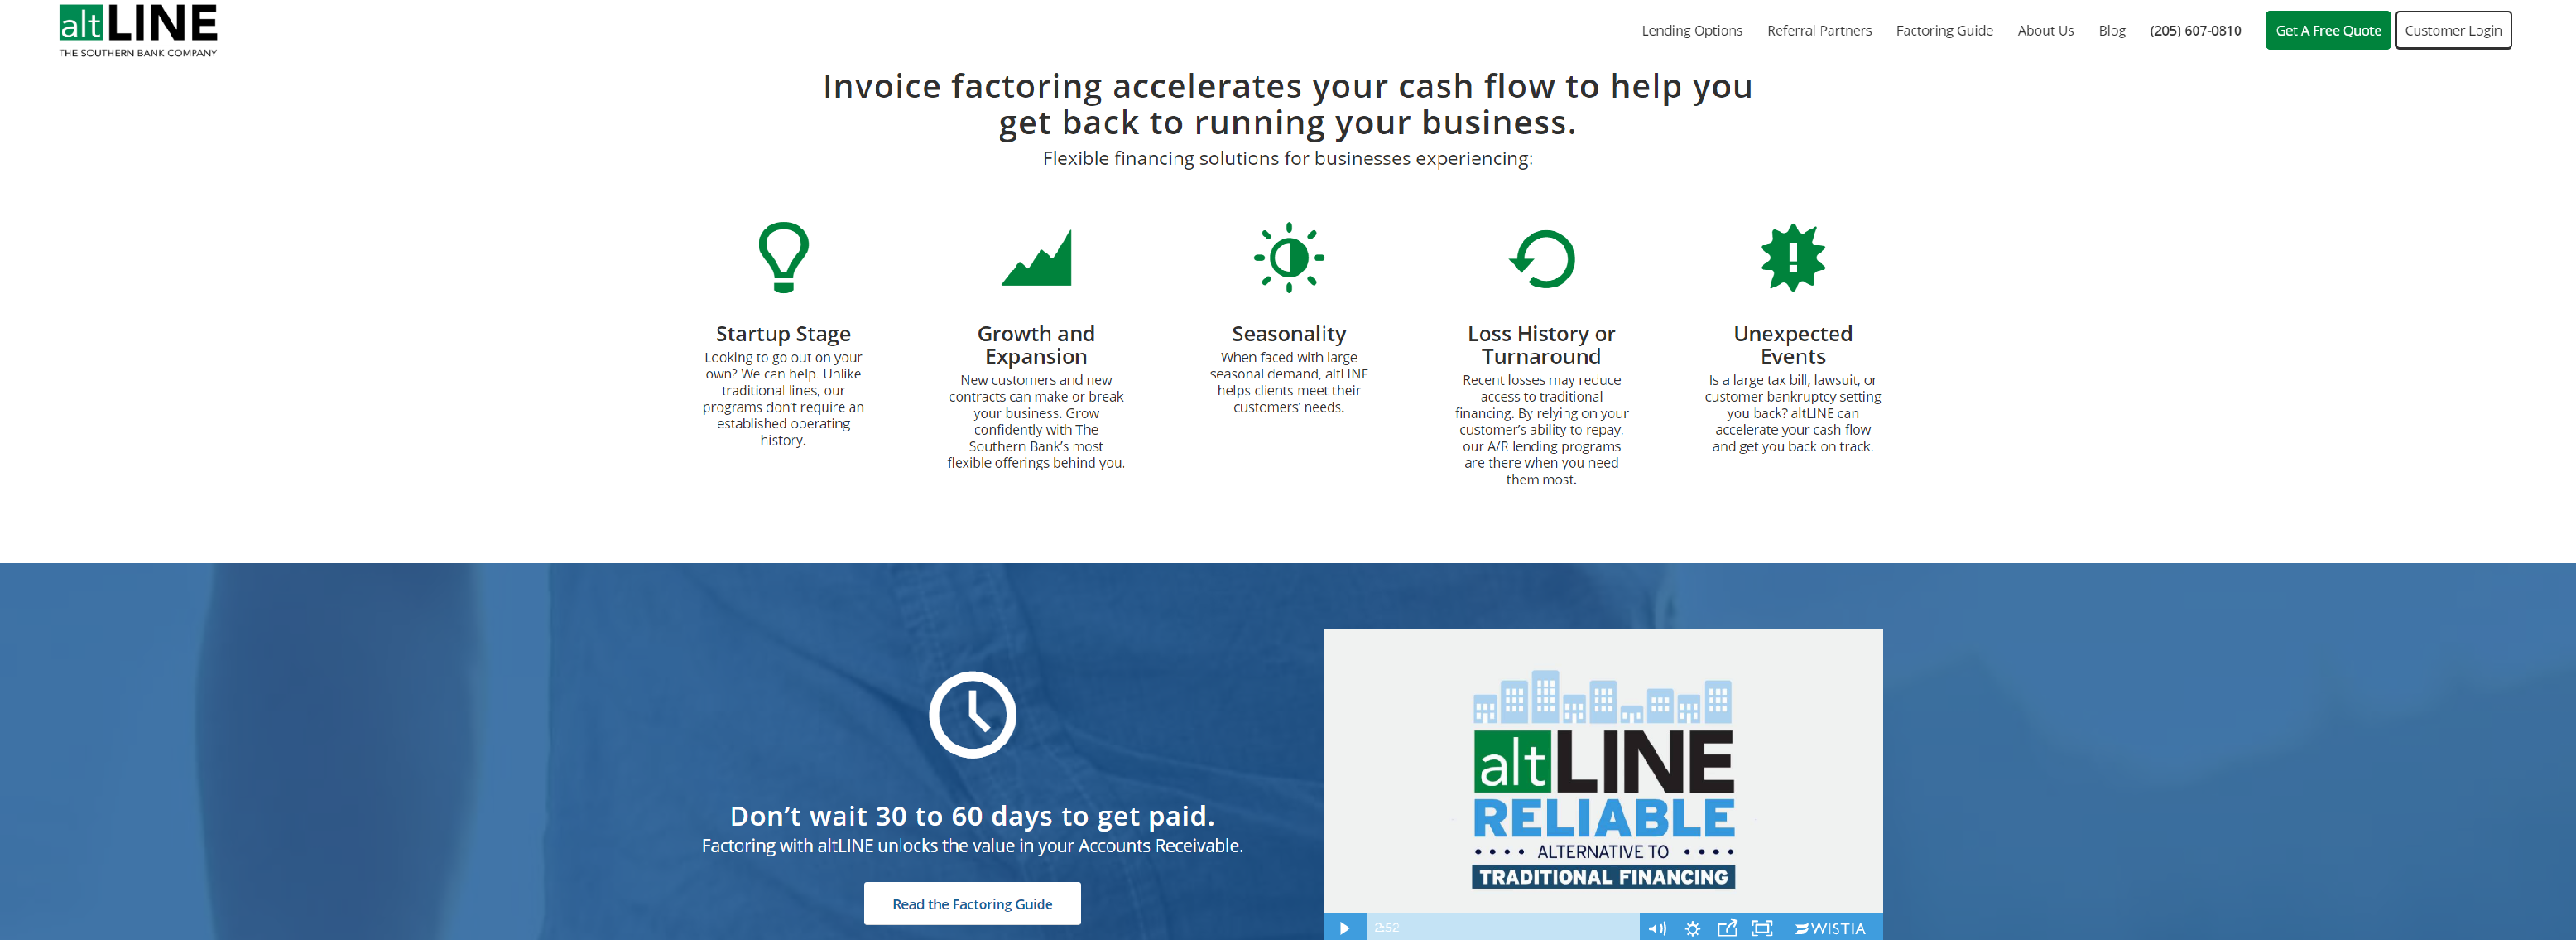 Top 10 Best Invoice Factoring Companies for Small and Midsize Businesses 2021 Cllax Top of IT